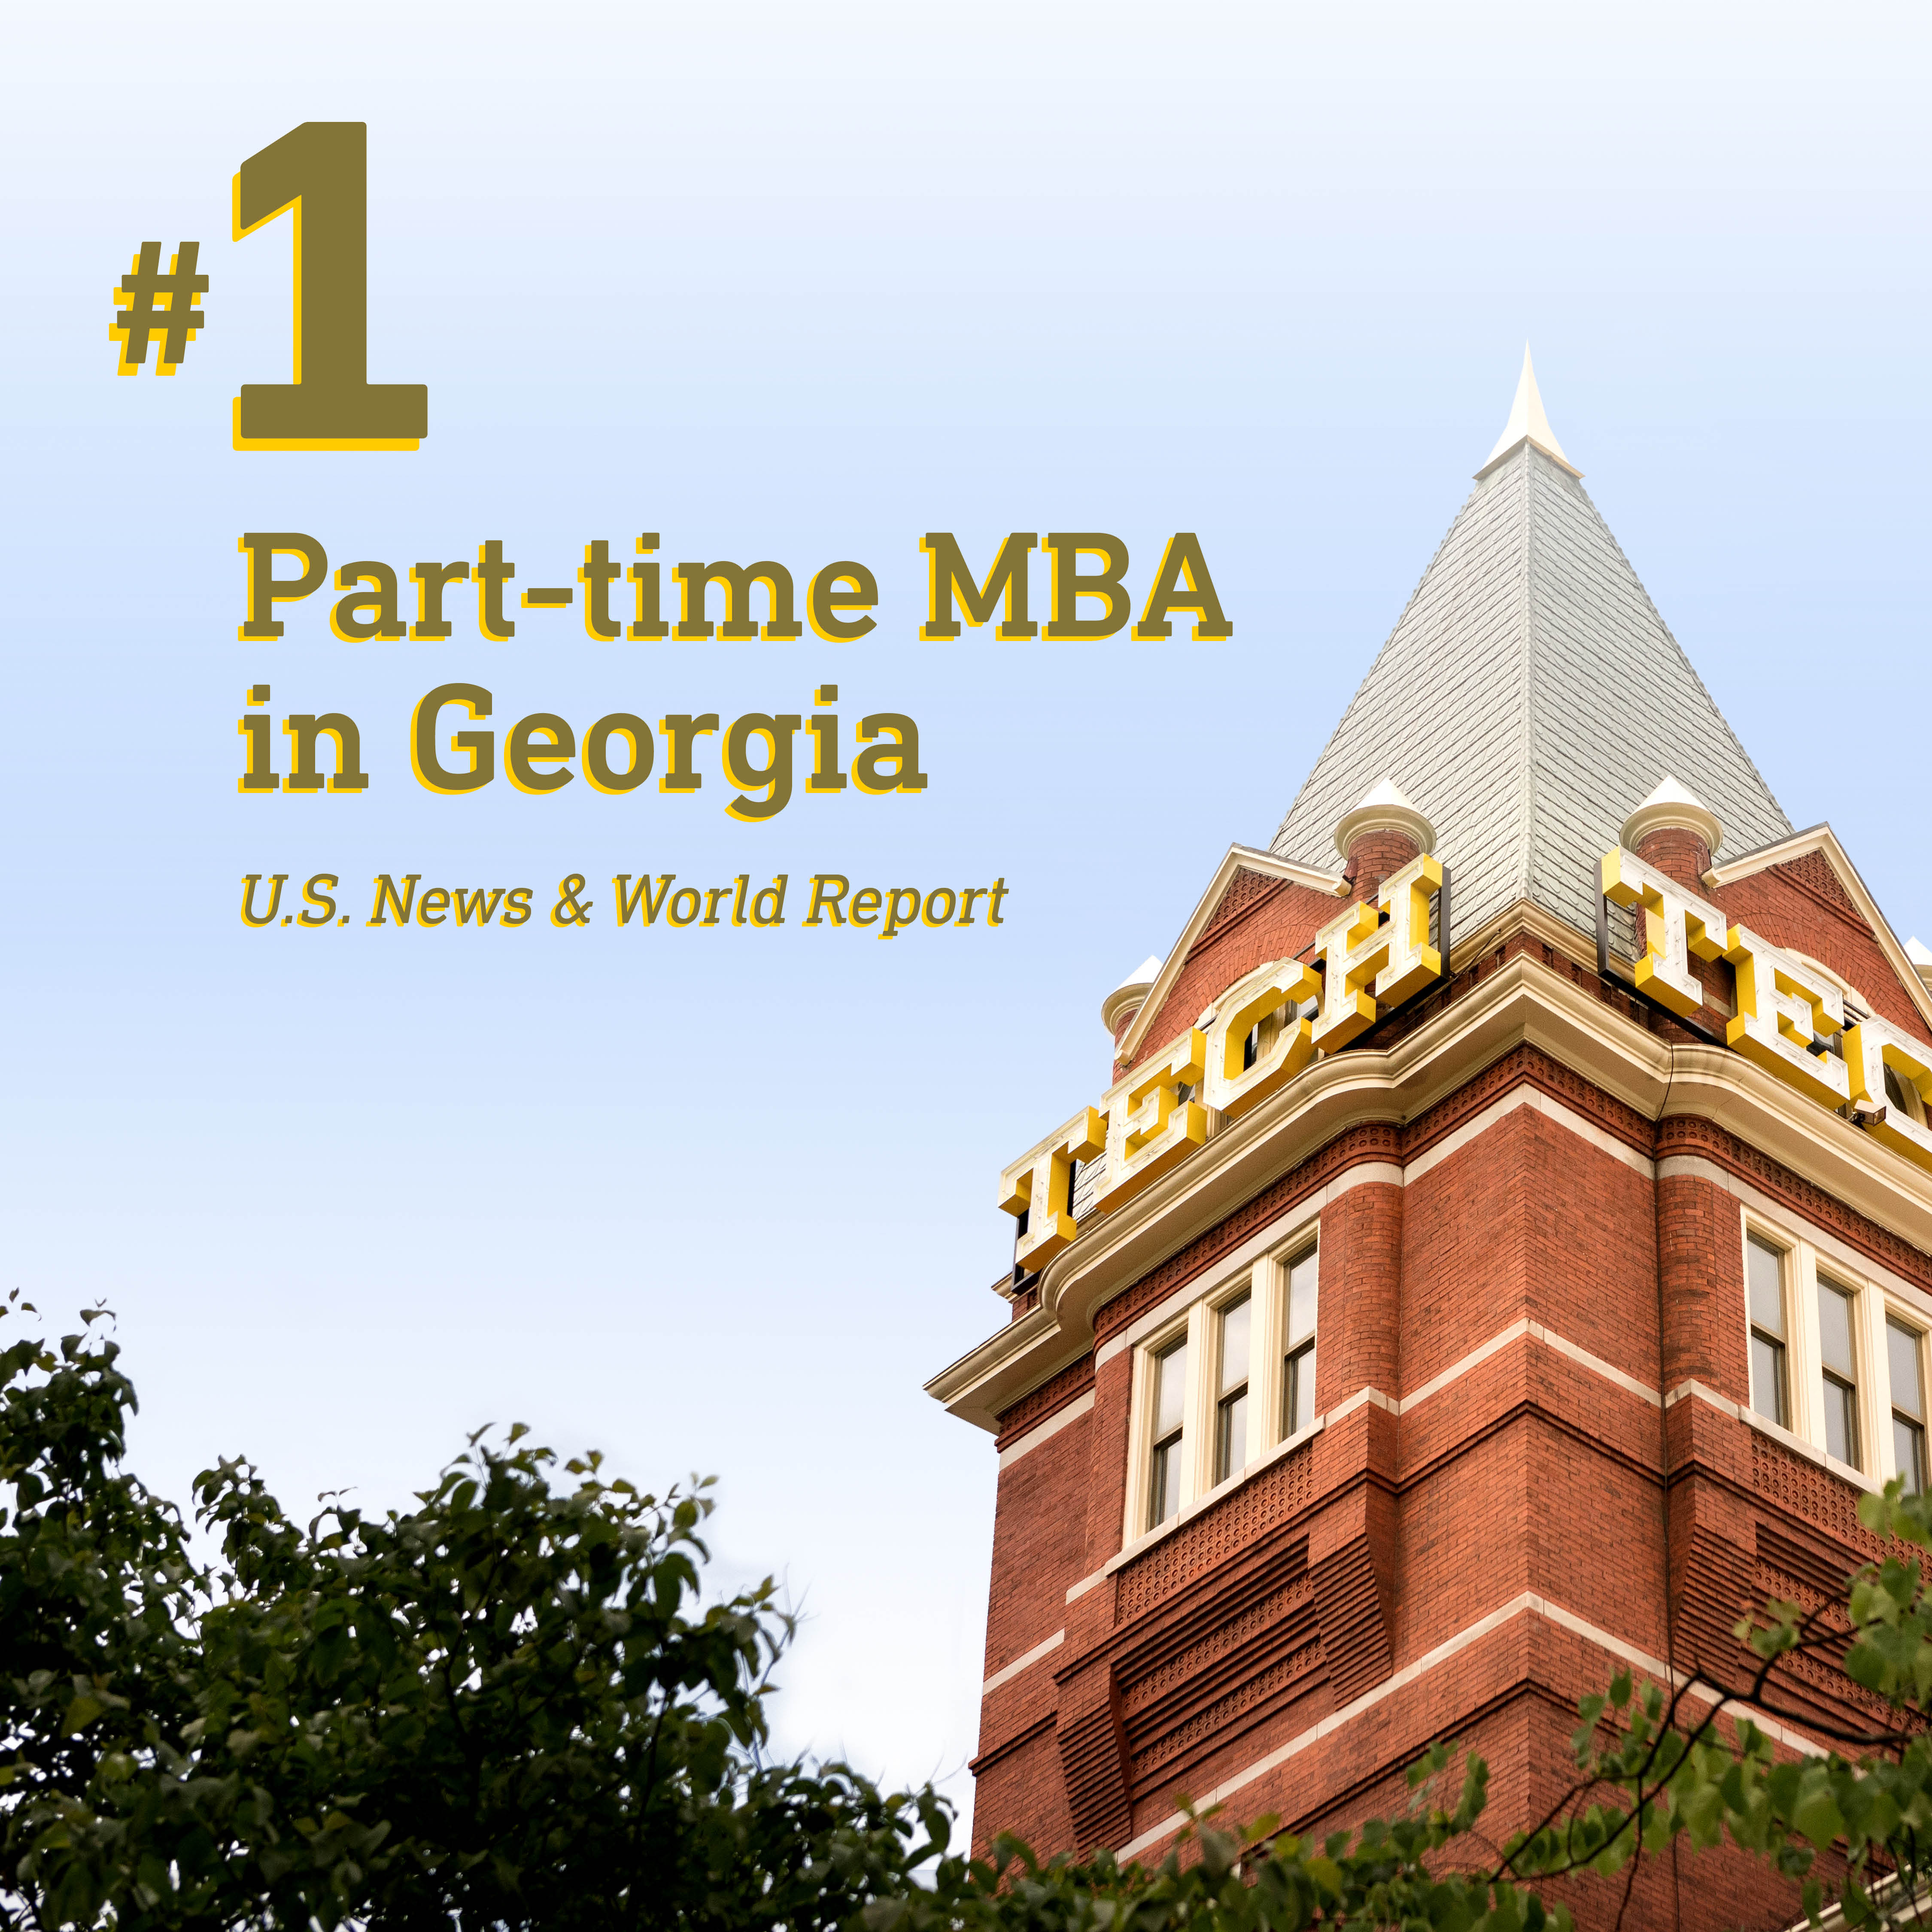 Georgia Tech's part-time MBA ranks No. 1 in the state, two years running